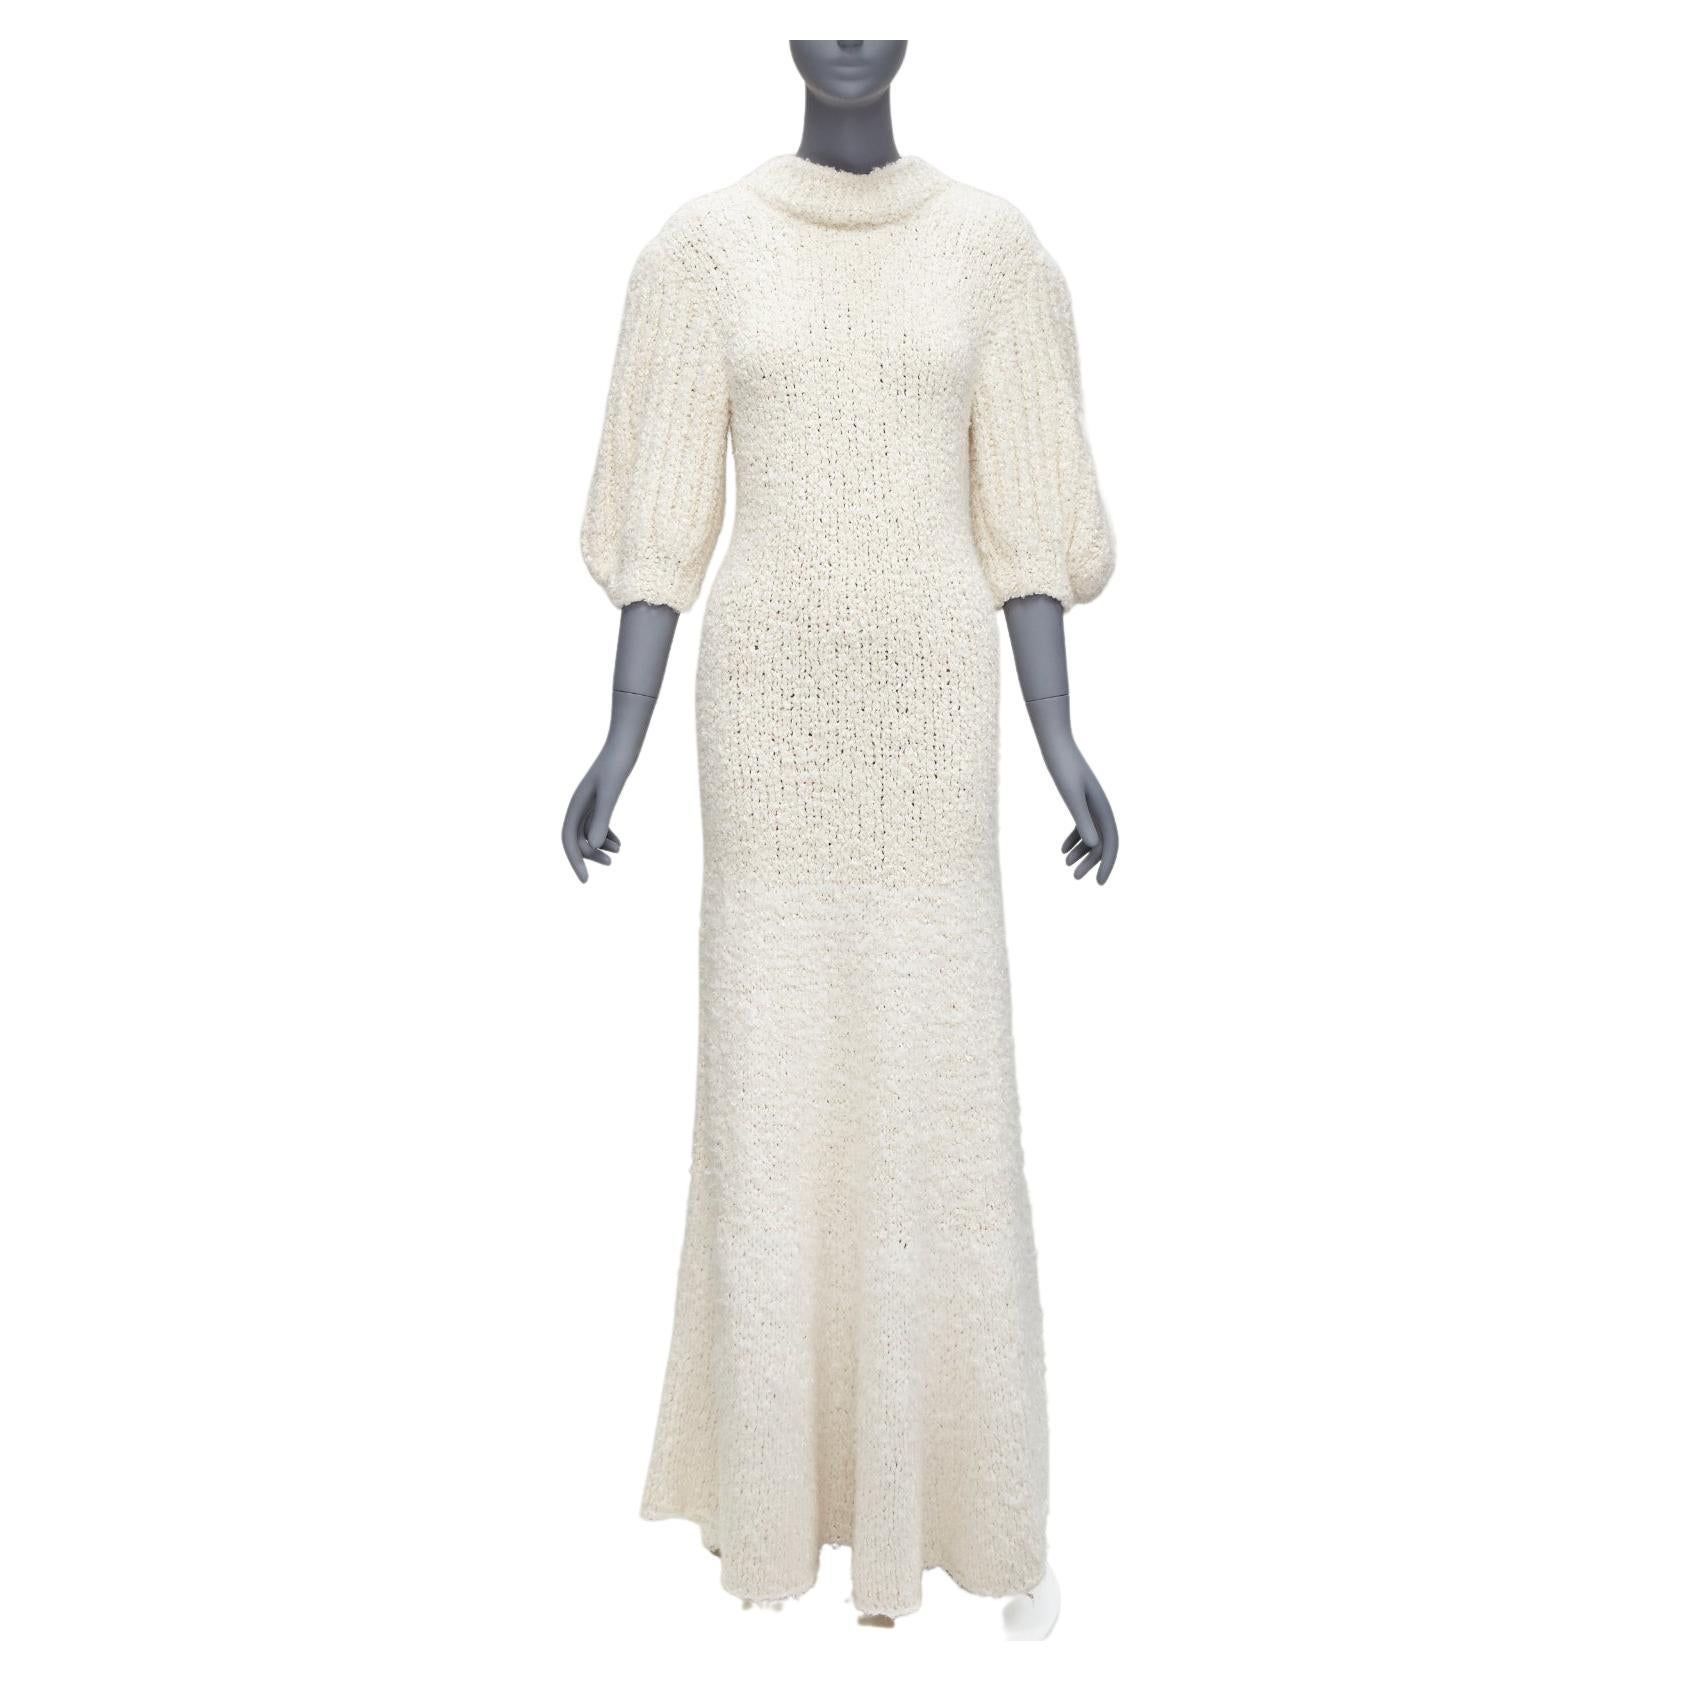 CECILIE BAHNSEN 2020 Latifa 100% silk cream knitted backless puff sleeves gown dress UK8 S
Reference: TGAS/D00191
Brand: Cecilie Bahnsen
Model: Latifa
Collection: 2020
Material: Silk
Color: Cream
Pattern: Solid
Closure: Self Tie
Extra Details: Self